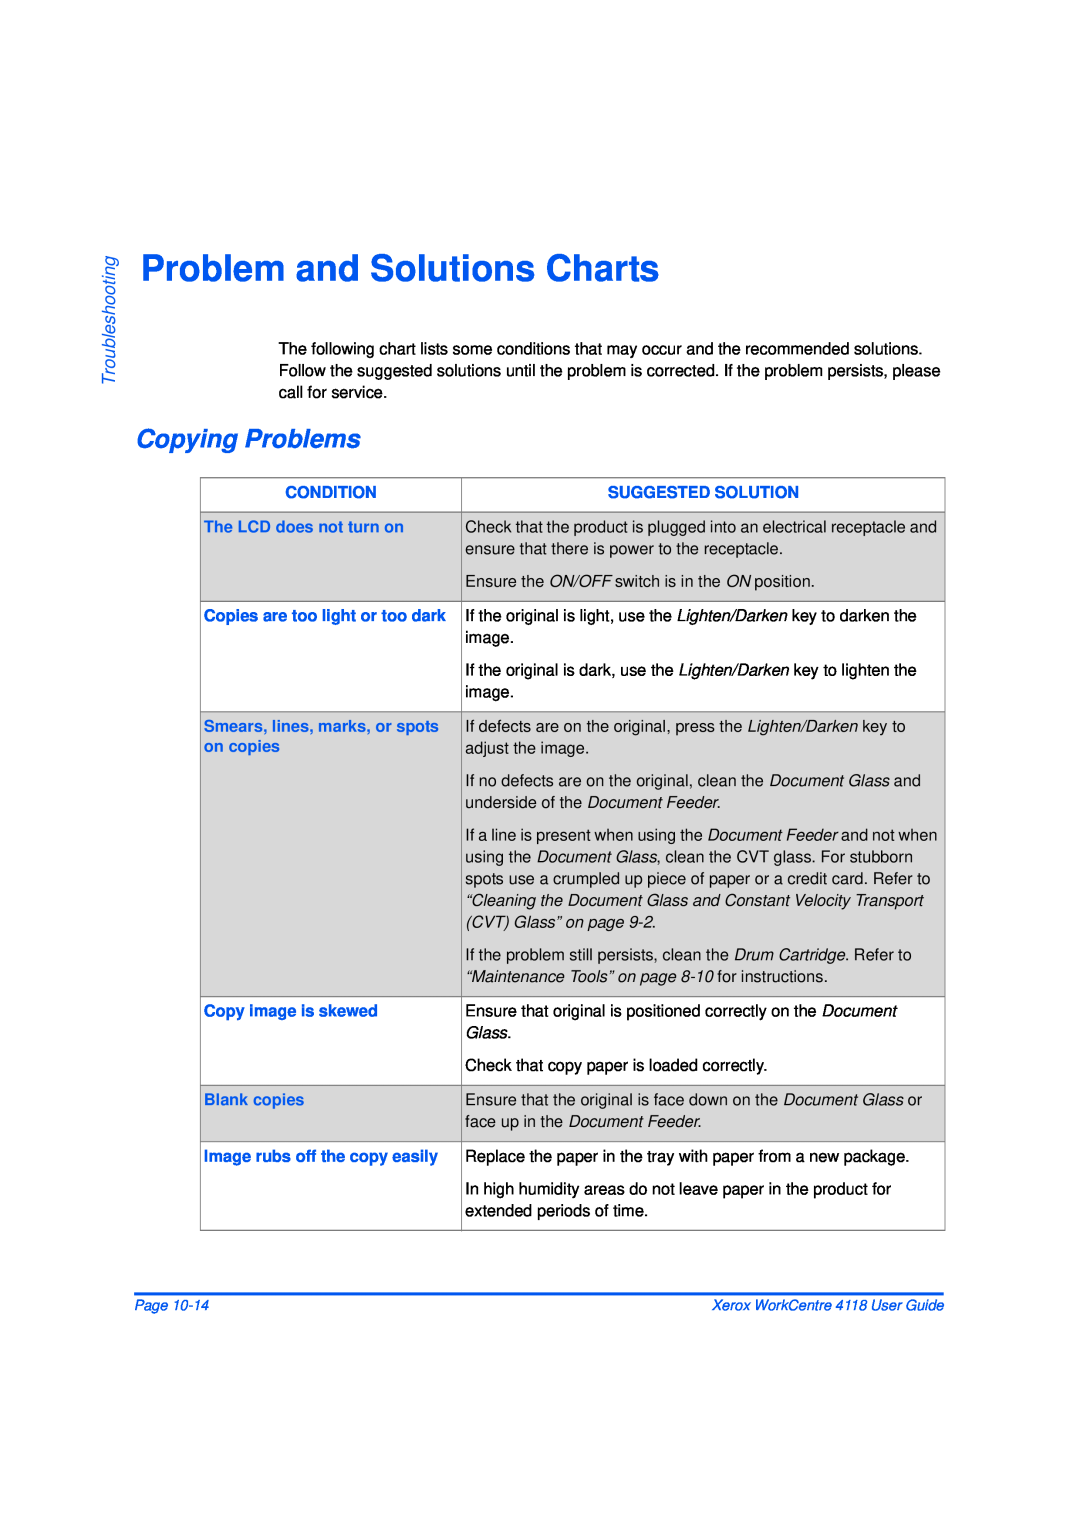 Xerox 32N00467 manual Problem and Solutions Charts, Copying Problems, Troubleshooting, CVT Glass” on page 